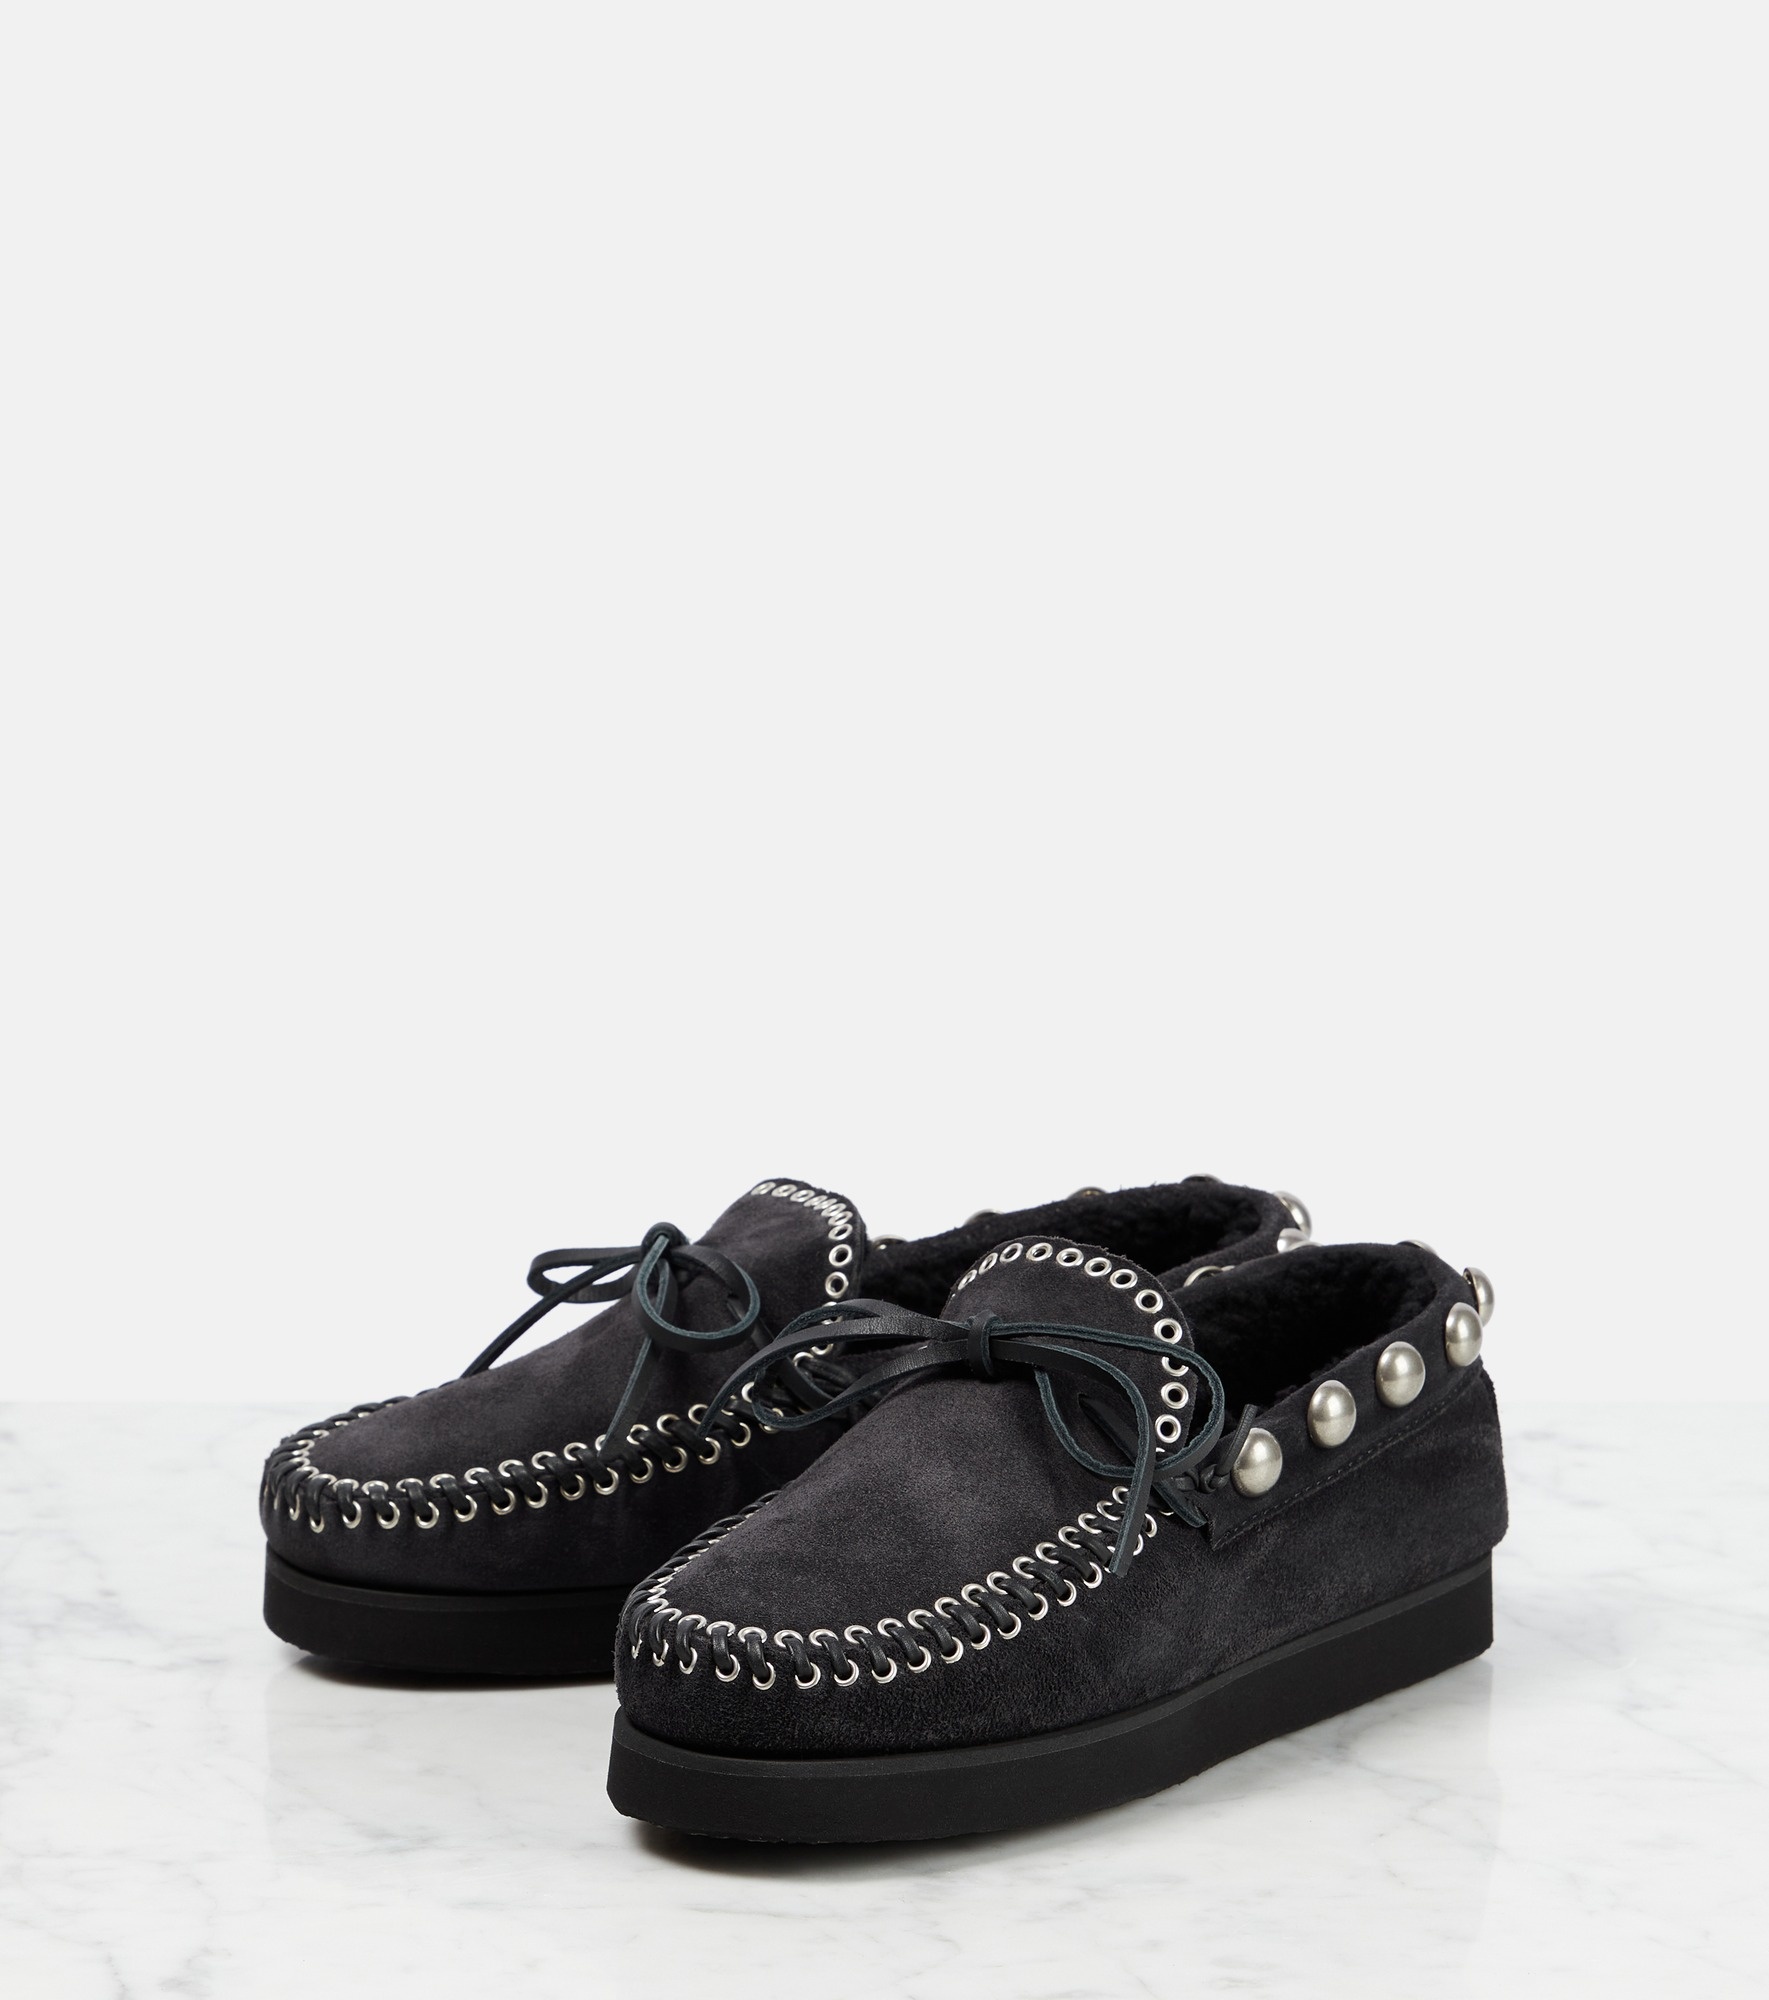 Forley shearling-lined suede mocassins - 5